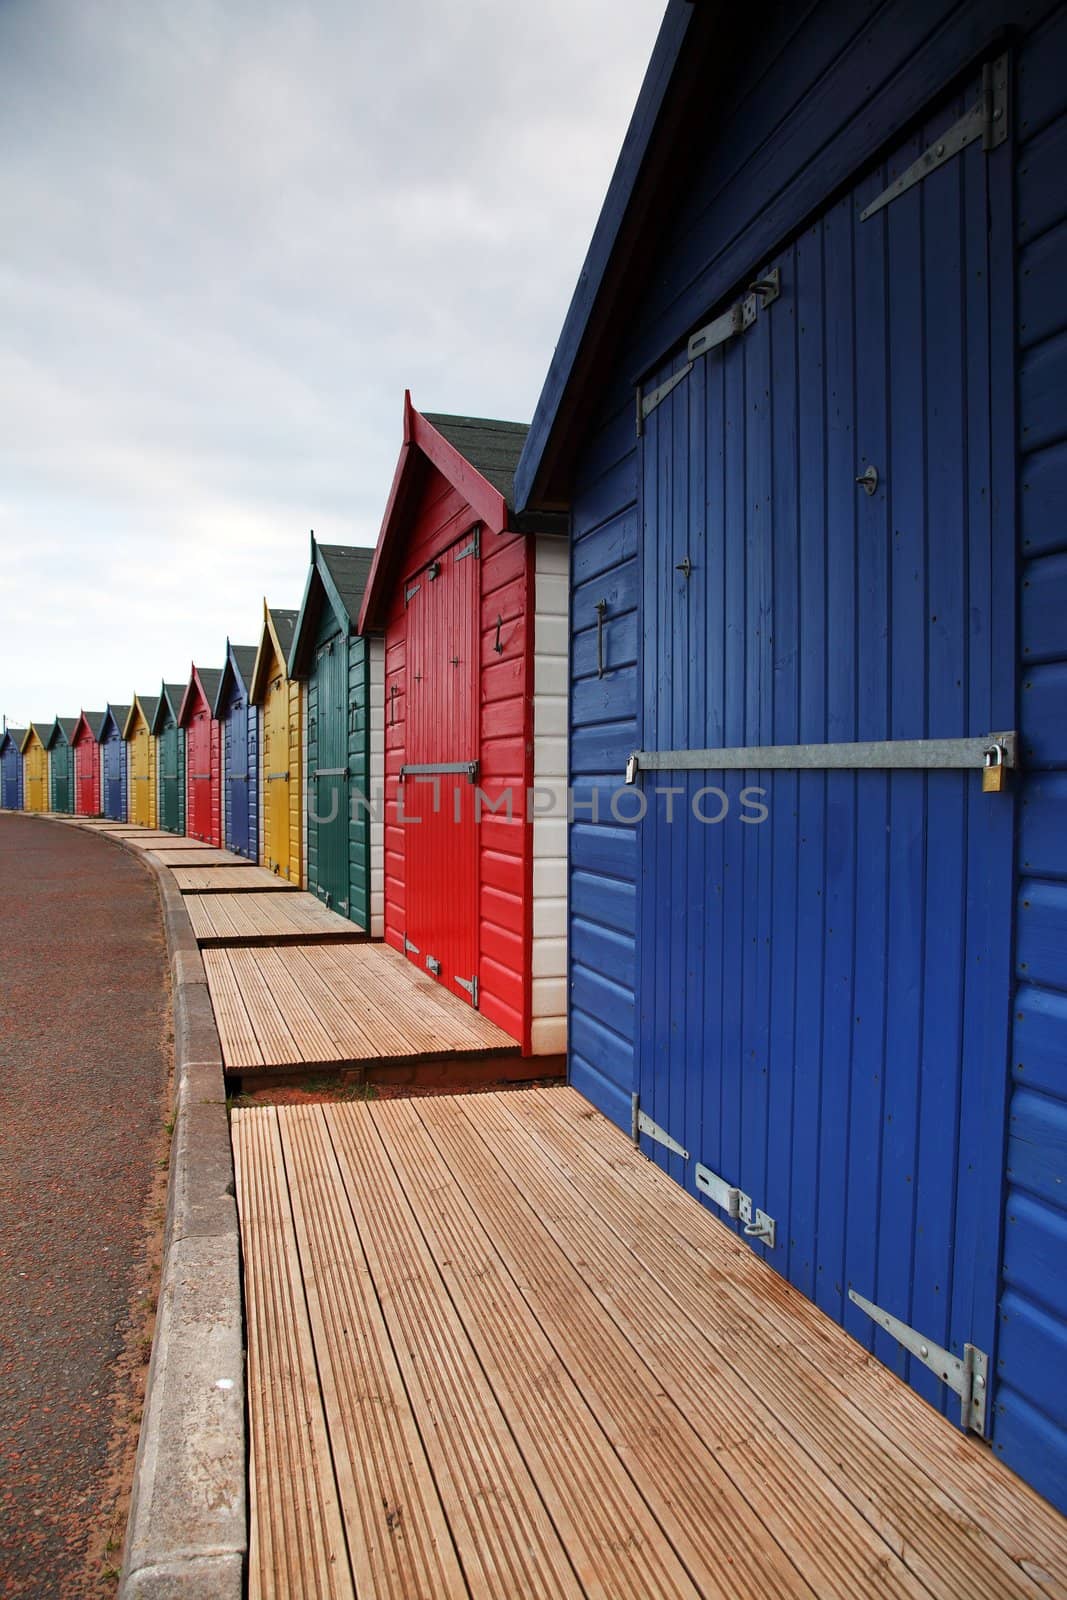 Traditional English beach huts on the beach in summer